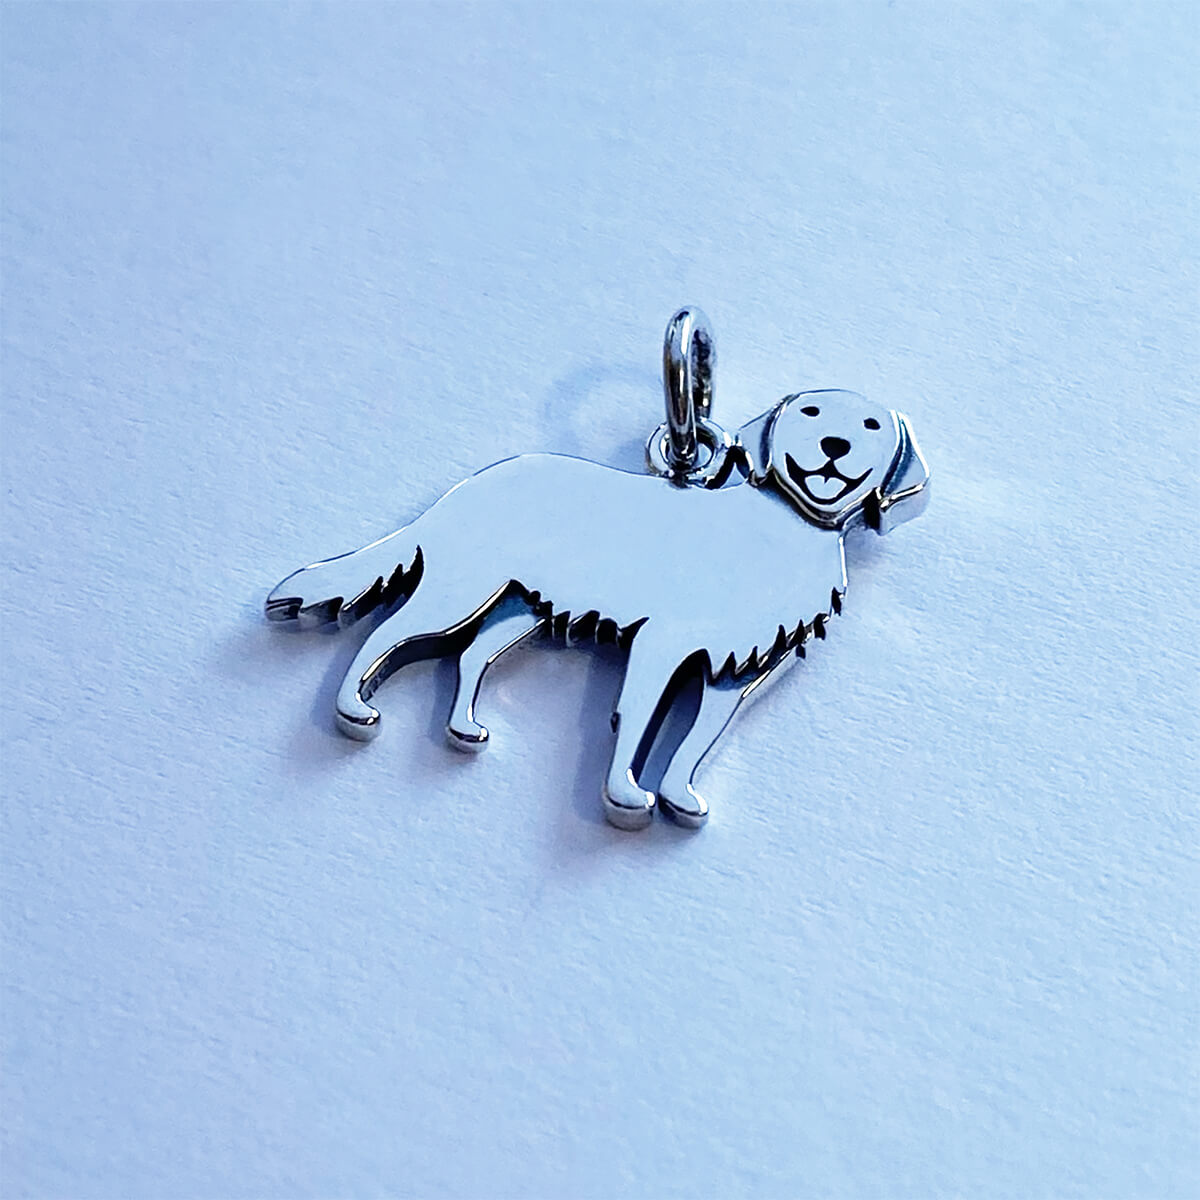 Sterling silver golden retriever dog pendant from Charmarama charms